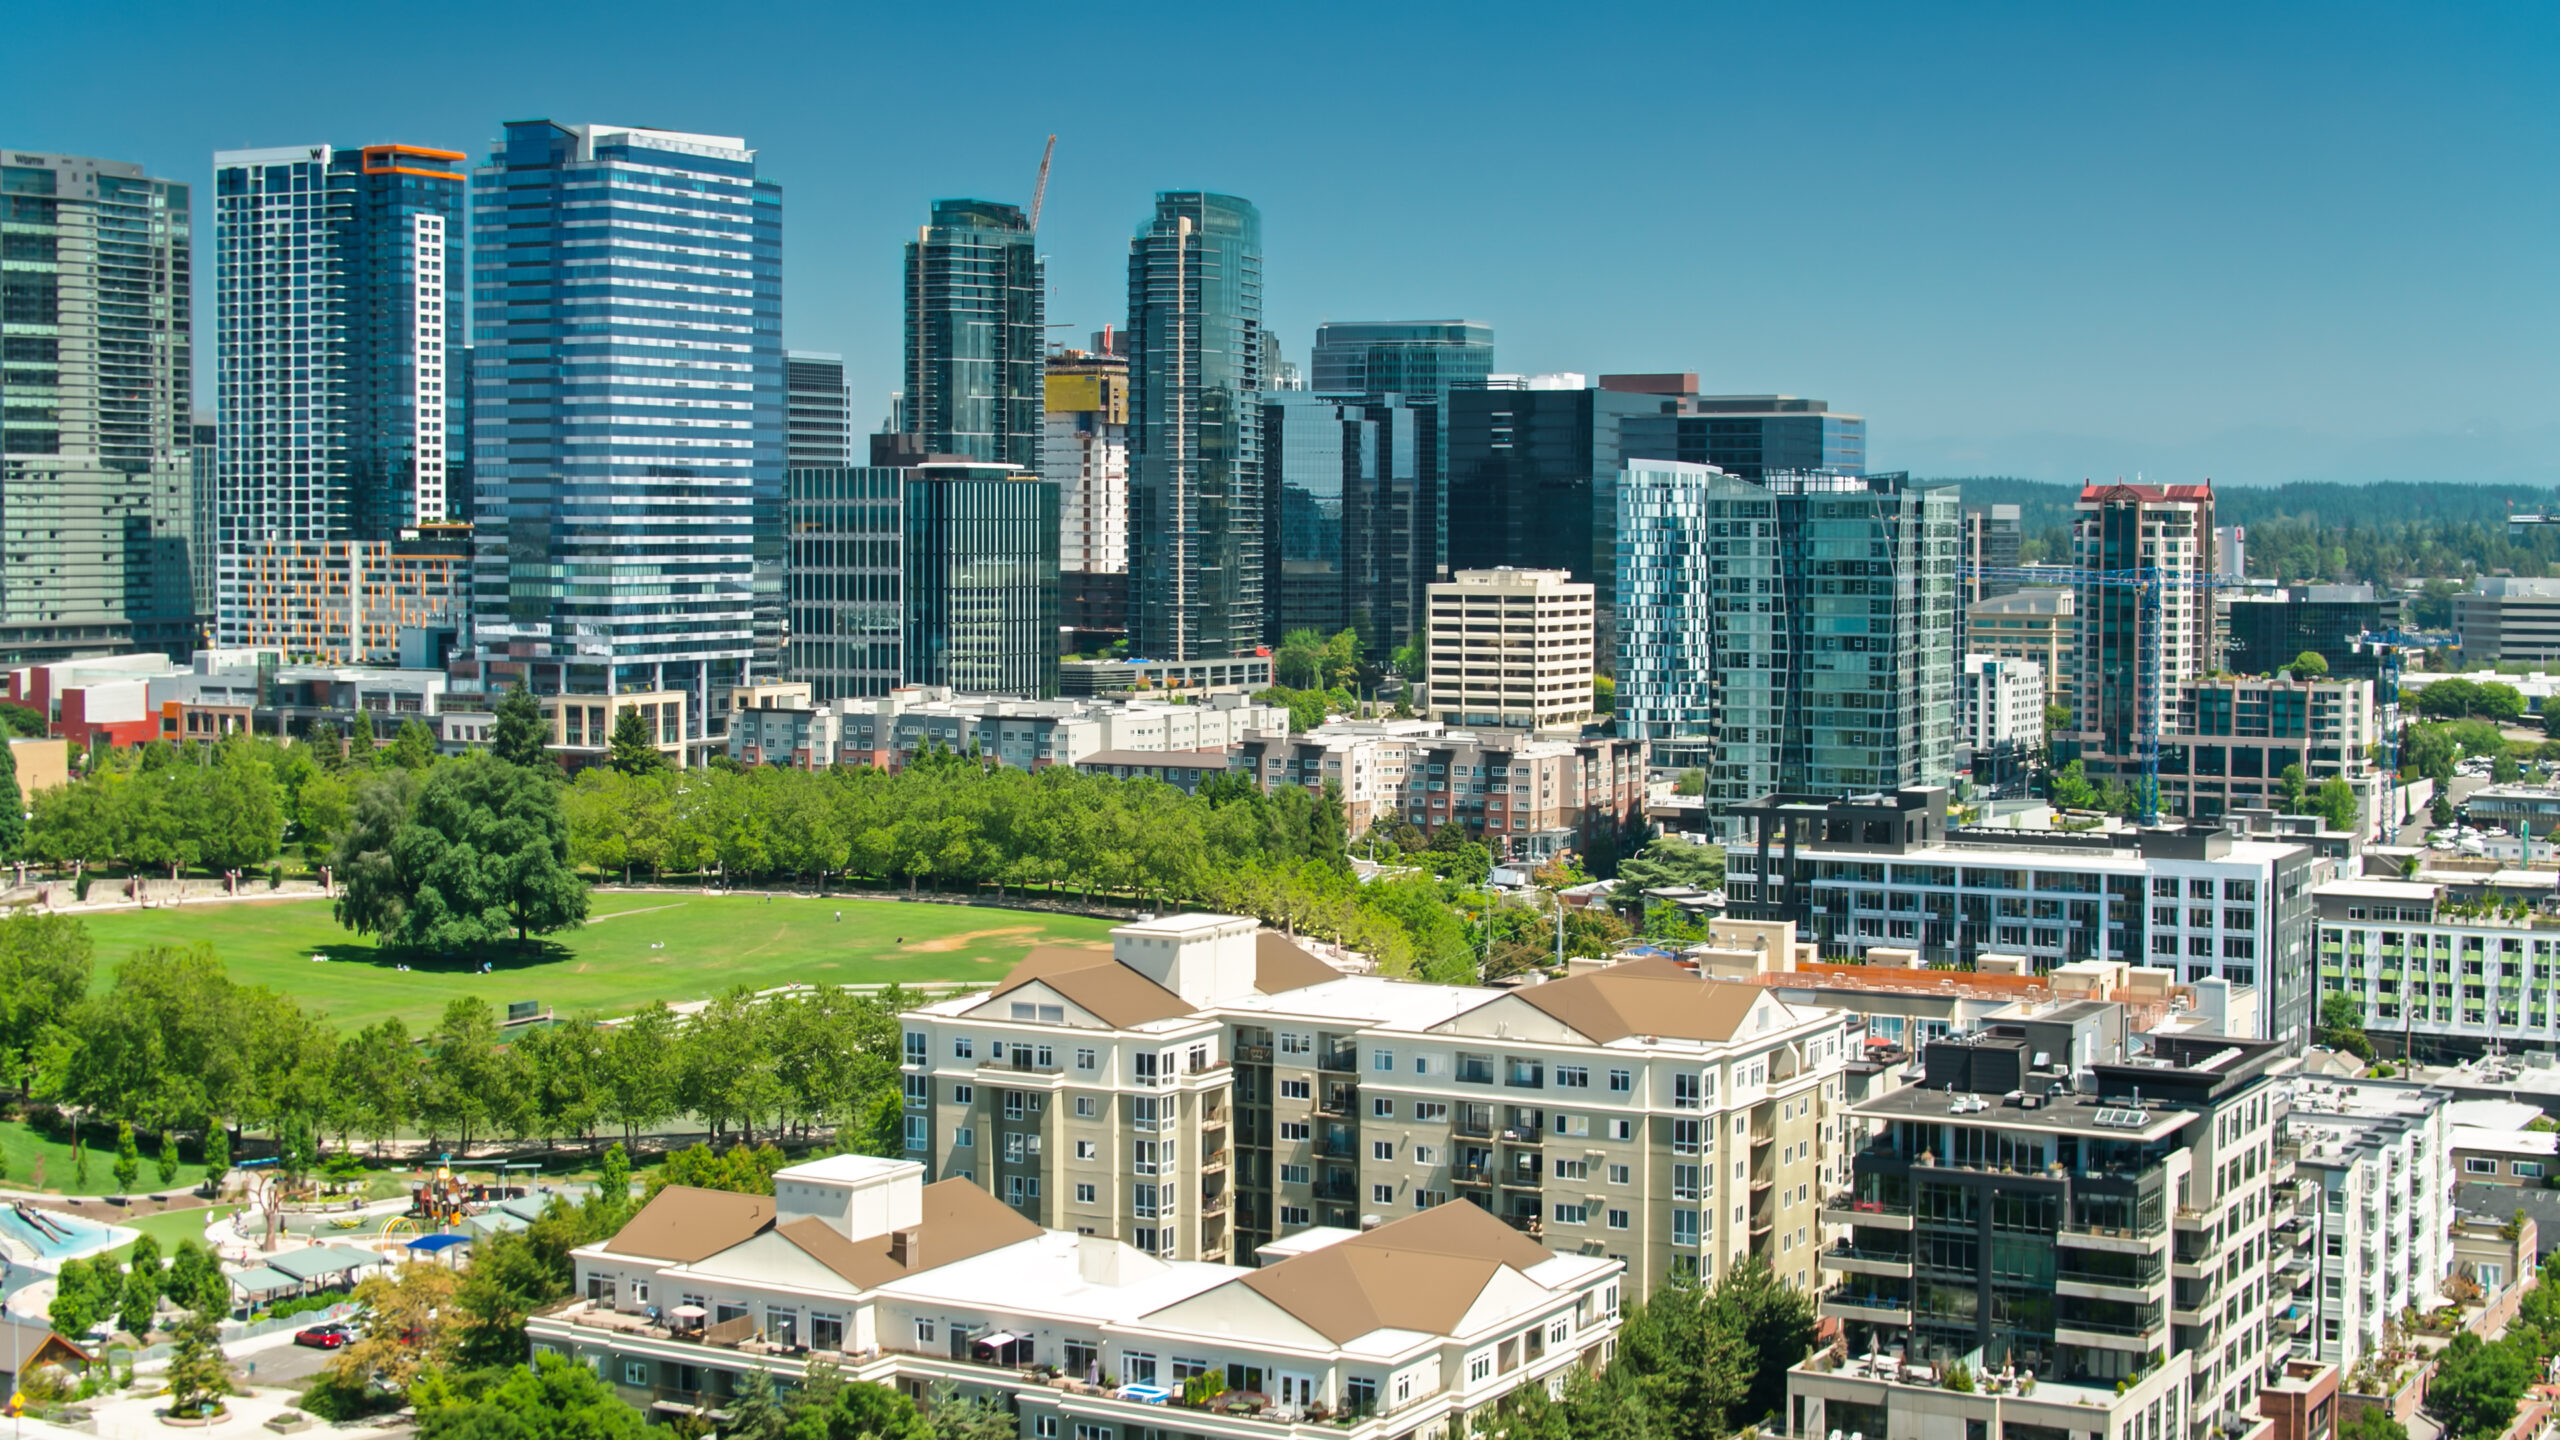 A park and buildings in downtown Bellevue, Washington